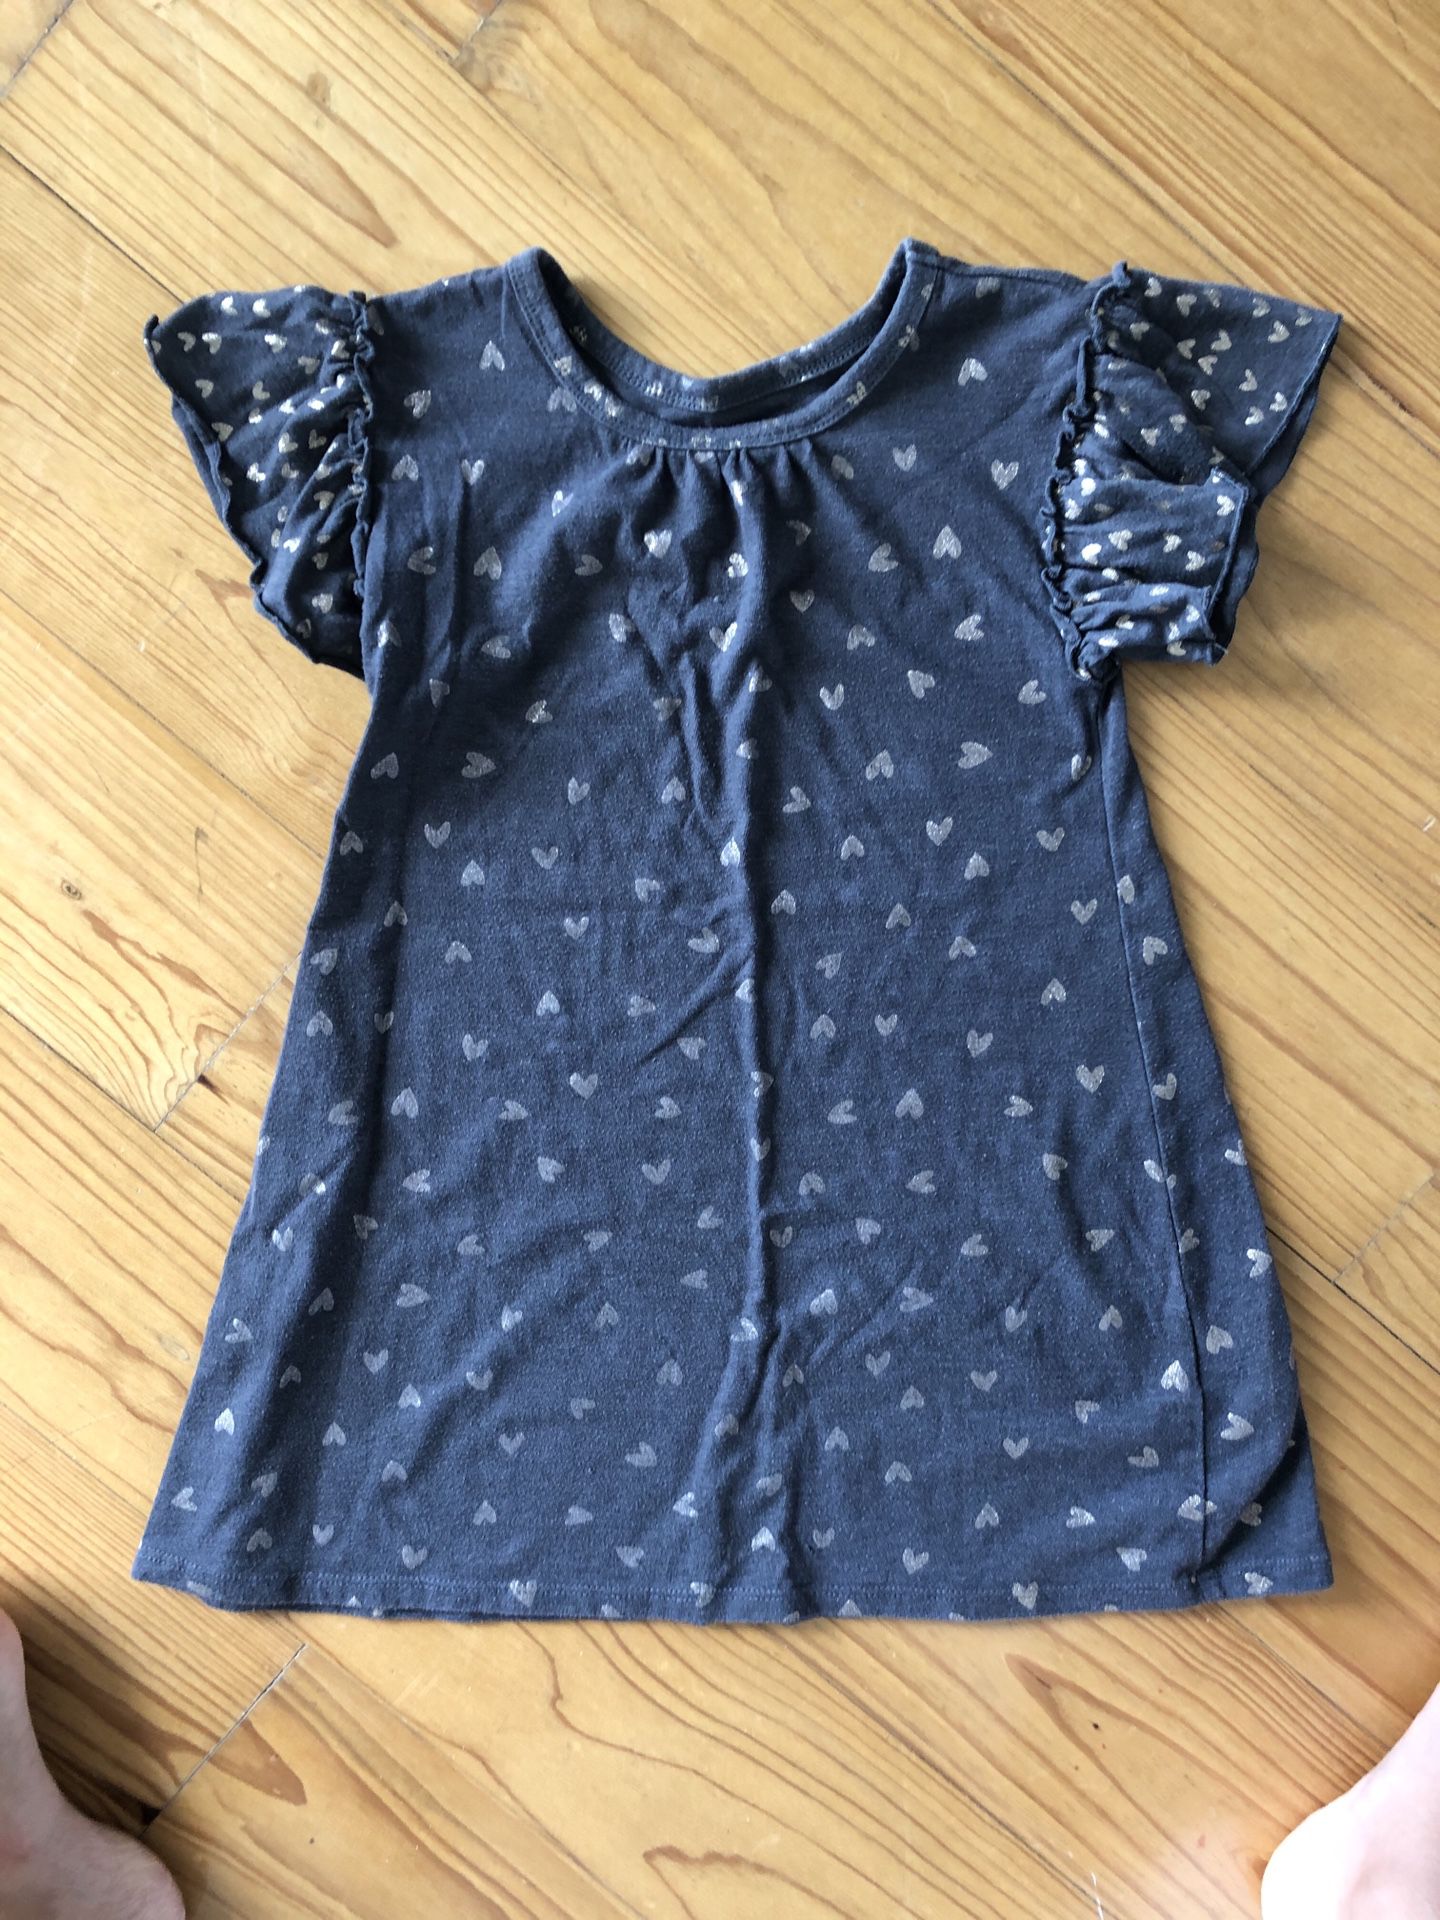 Girls dresses and clothes size 4-6t